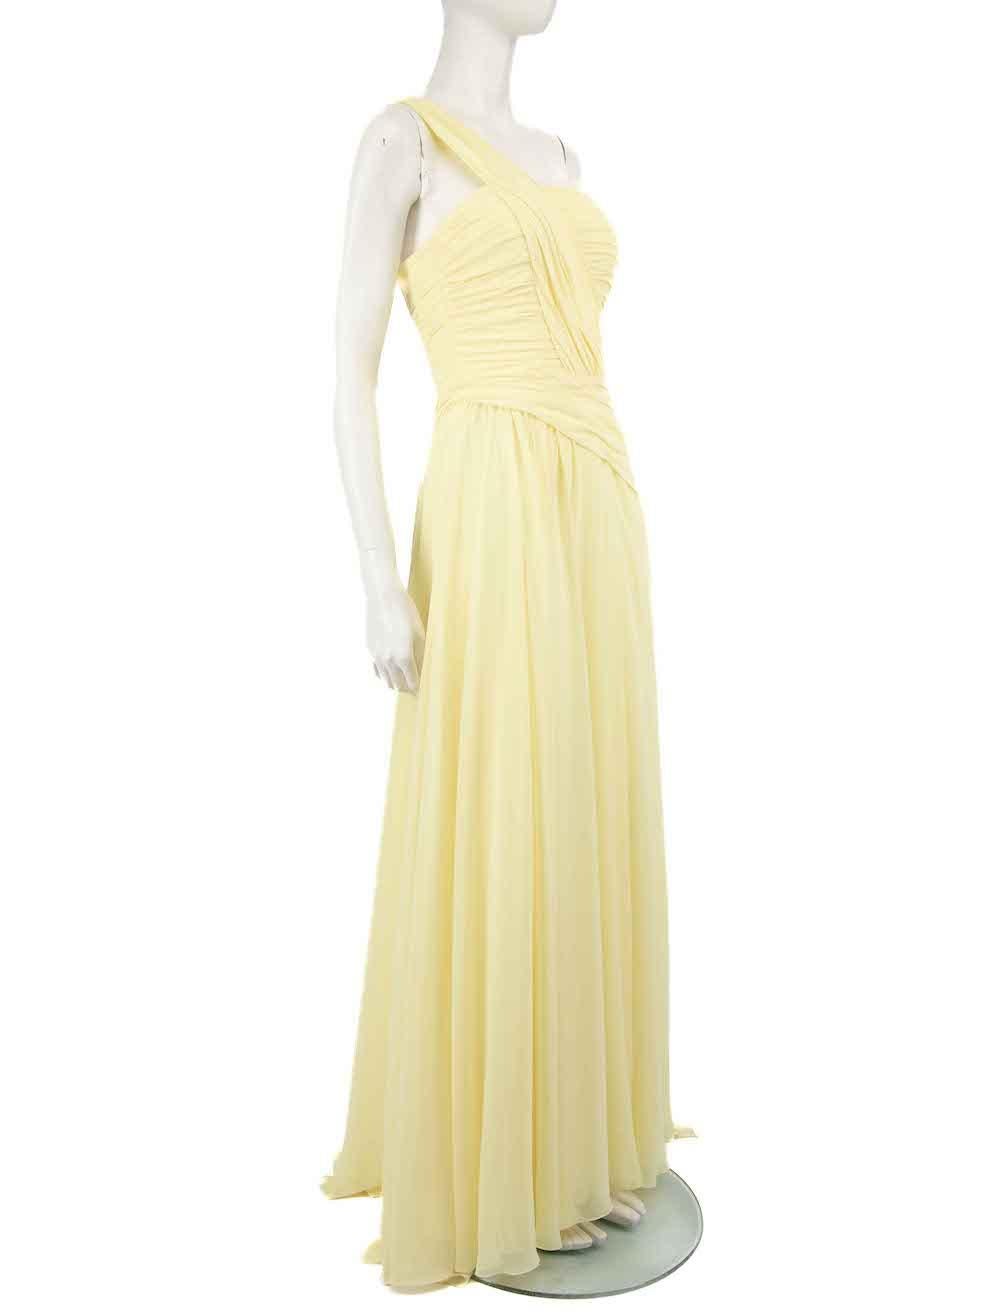 CONDITION is Very good. Minimal wear to dress is evident. The chiffon asymmetric detail is loose below the waist area and pulled threads can be seen on the waist on this used Honayda designer resale item.
 
 
 
 Details
 
 
 Yellow
 
 Polyester